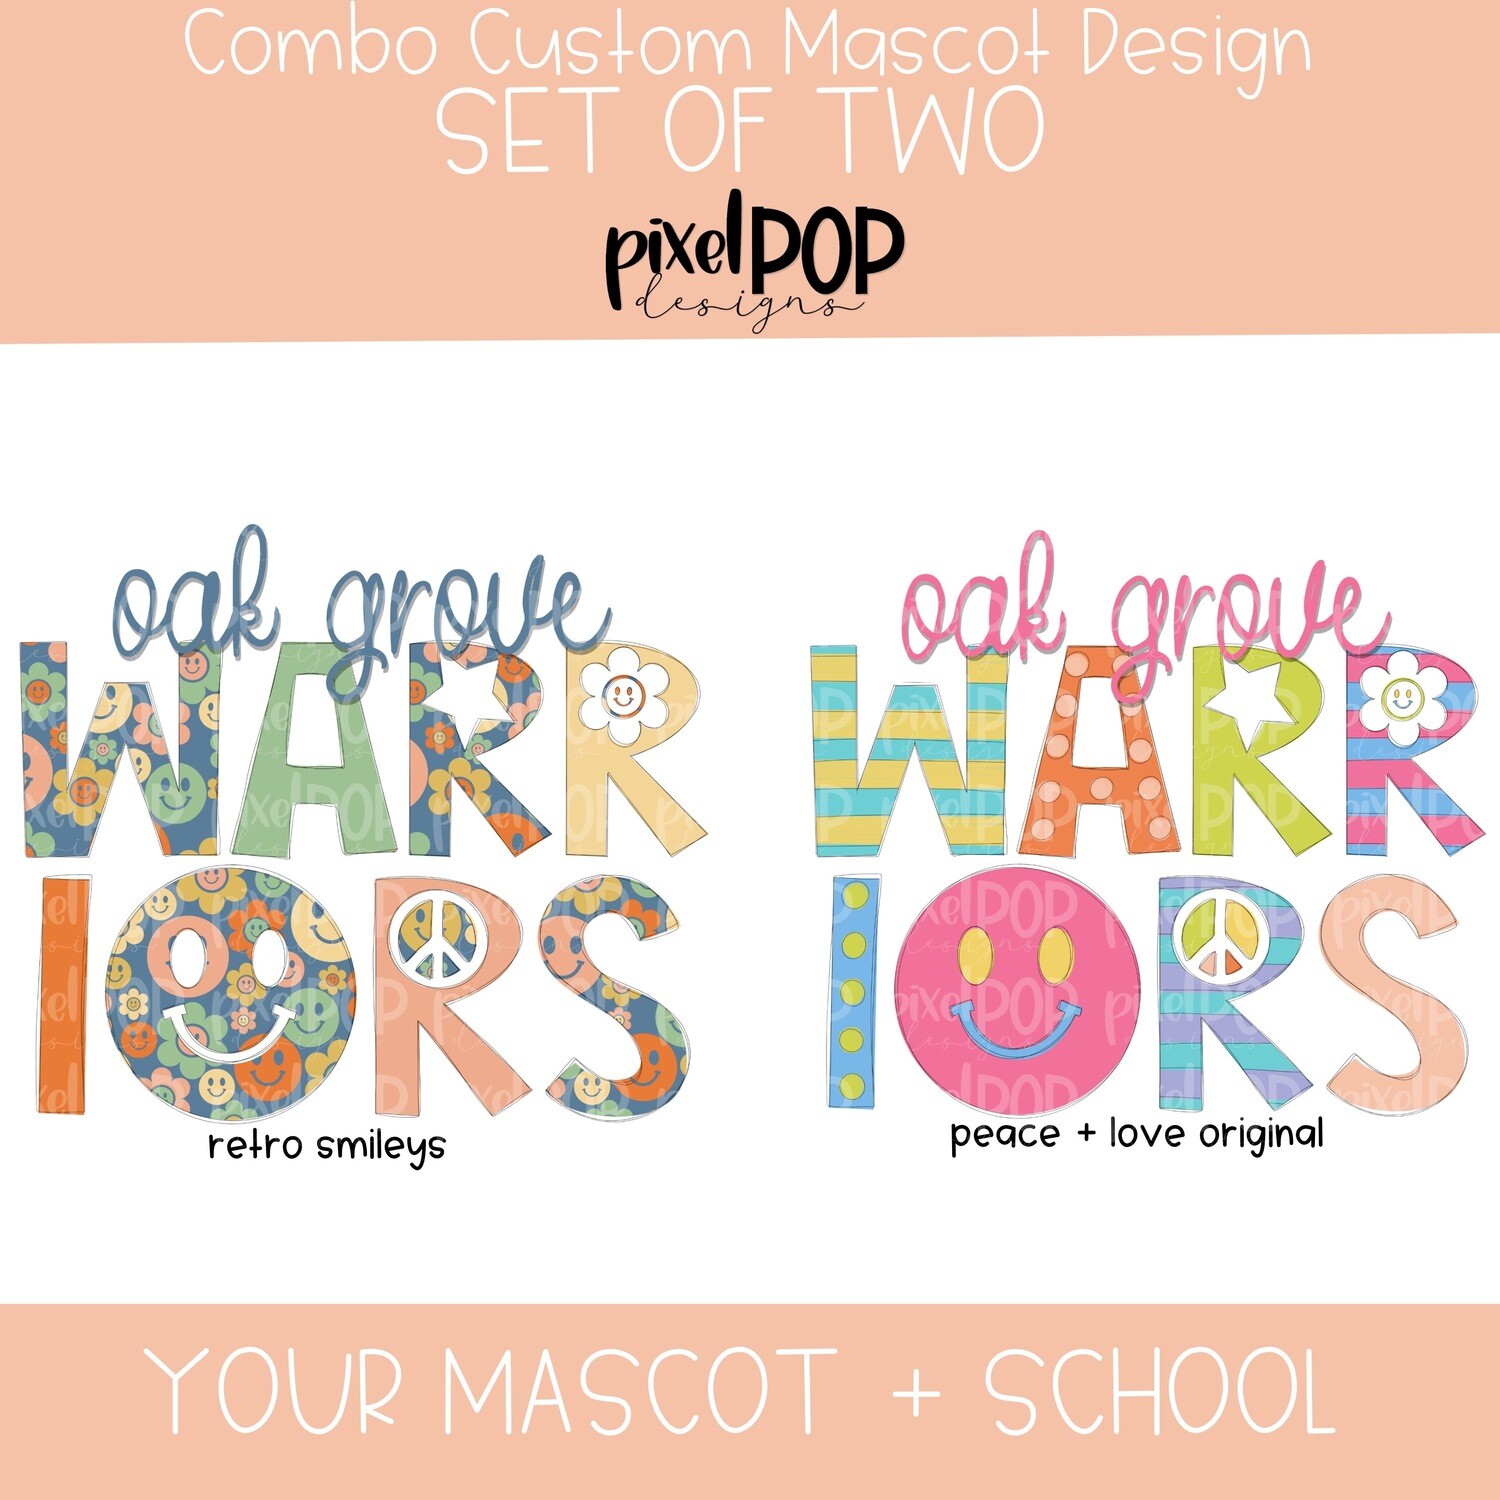 Set of TWO Mascot + School Images (Retro Smileys and Peace + Love)